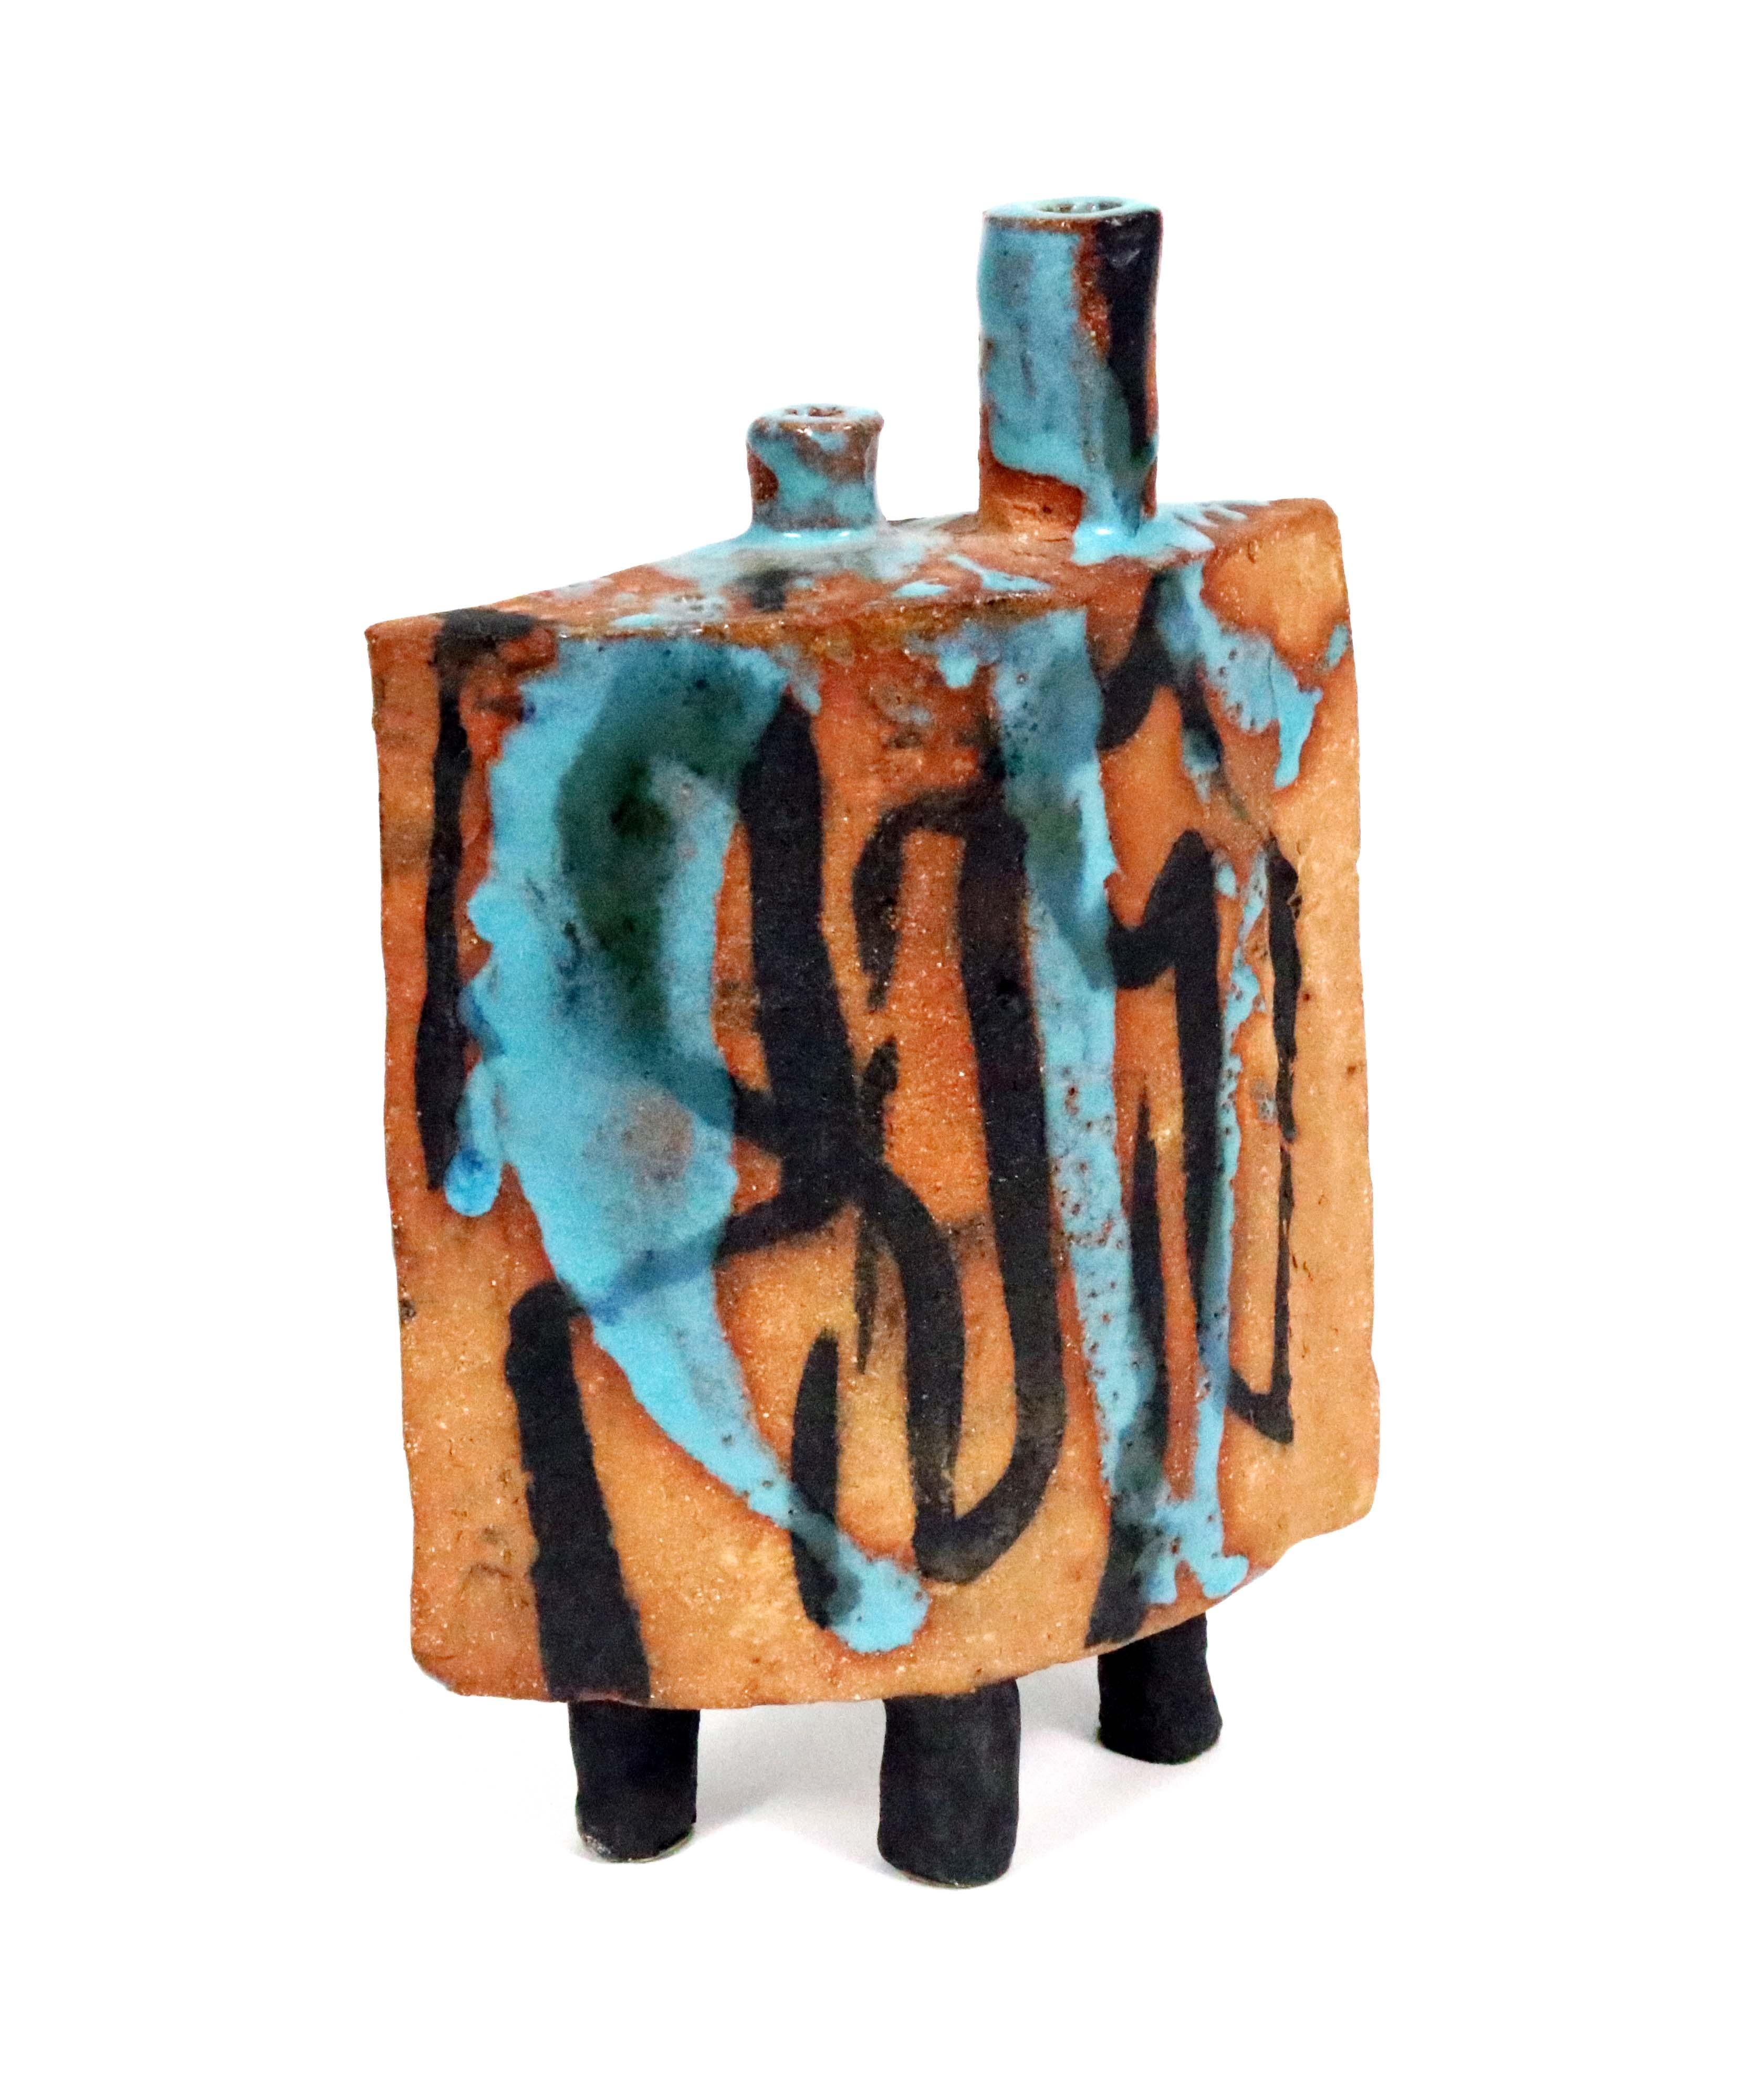 A wonderful midcentury abstract ceramic sculpture by San Francisco artist Win Ng.

Signed. Single owner, excellent condition. Purchased in California in 1965.

About Win Ng:

Born in San Francisco’s Chinatown, Win Ng established his reputation